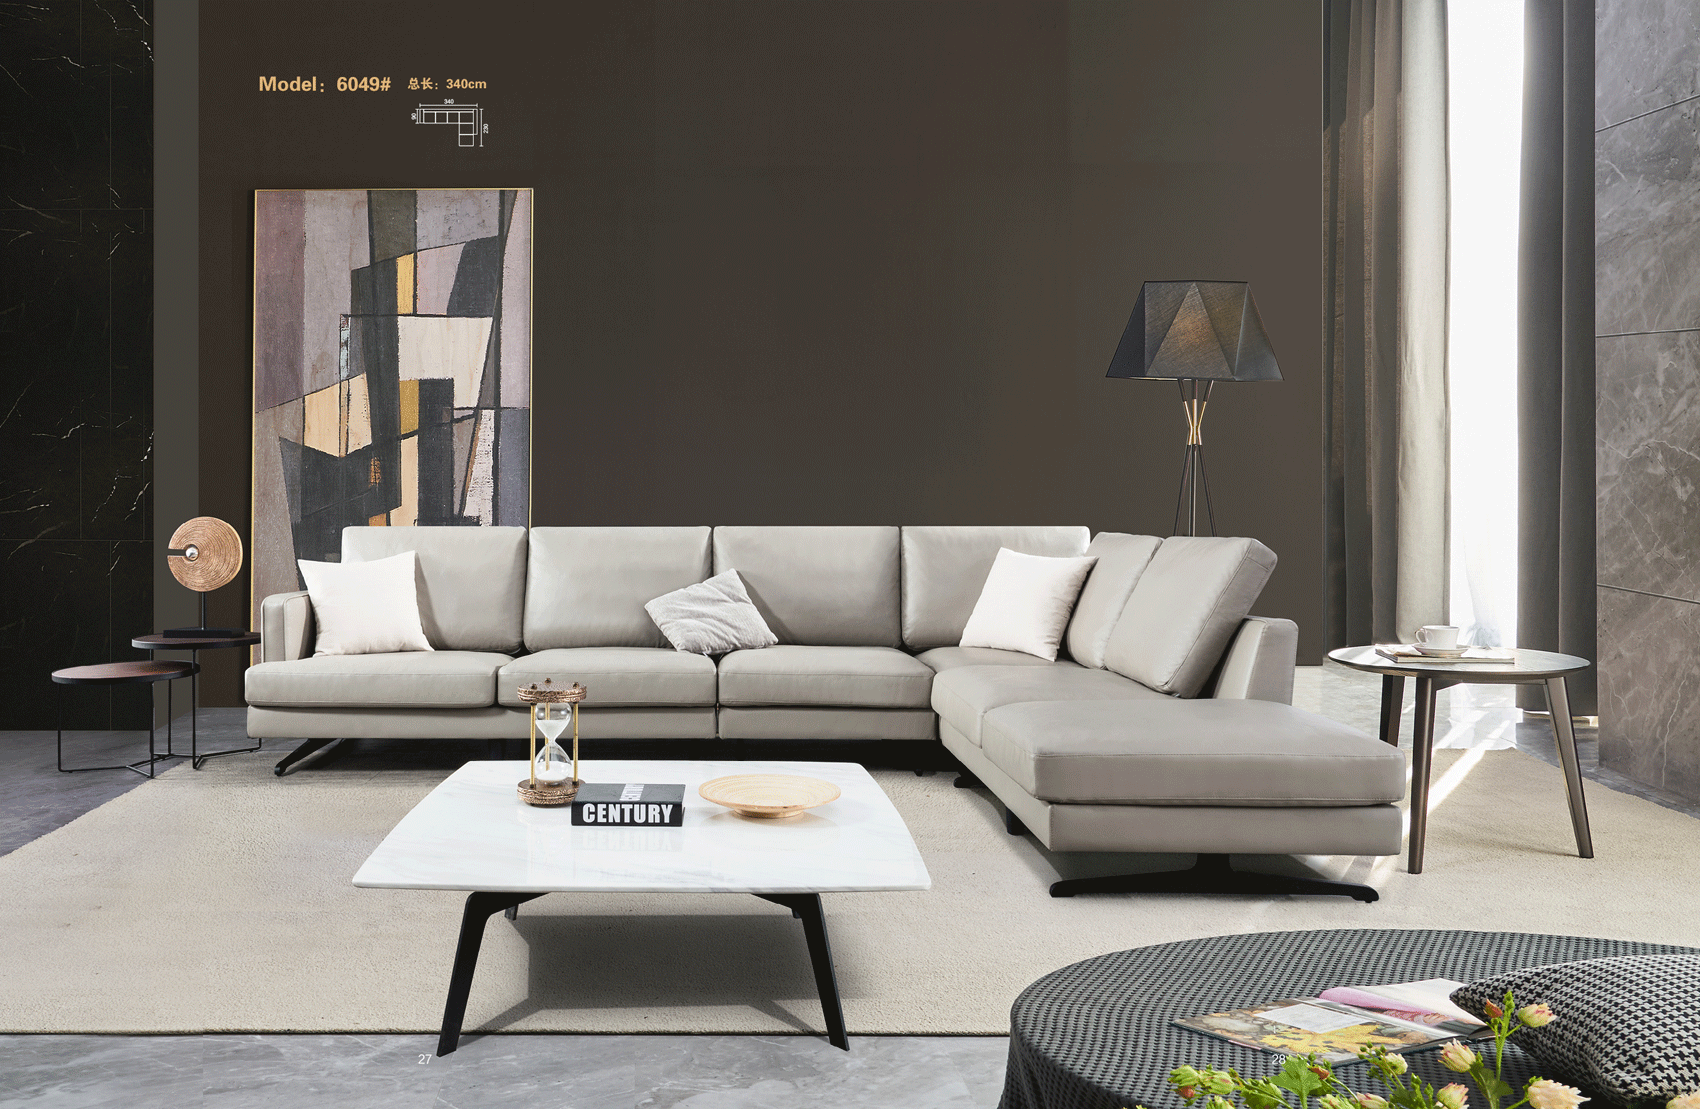 Brands ALF Capri Coffee Tables, Italy 6049 Sectional